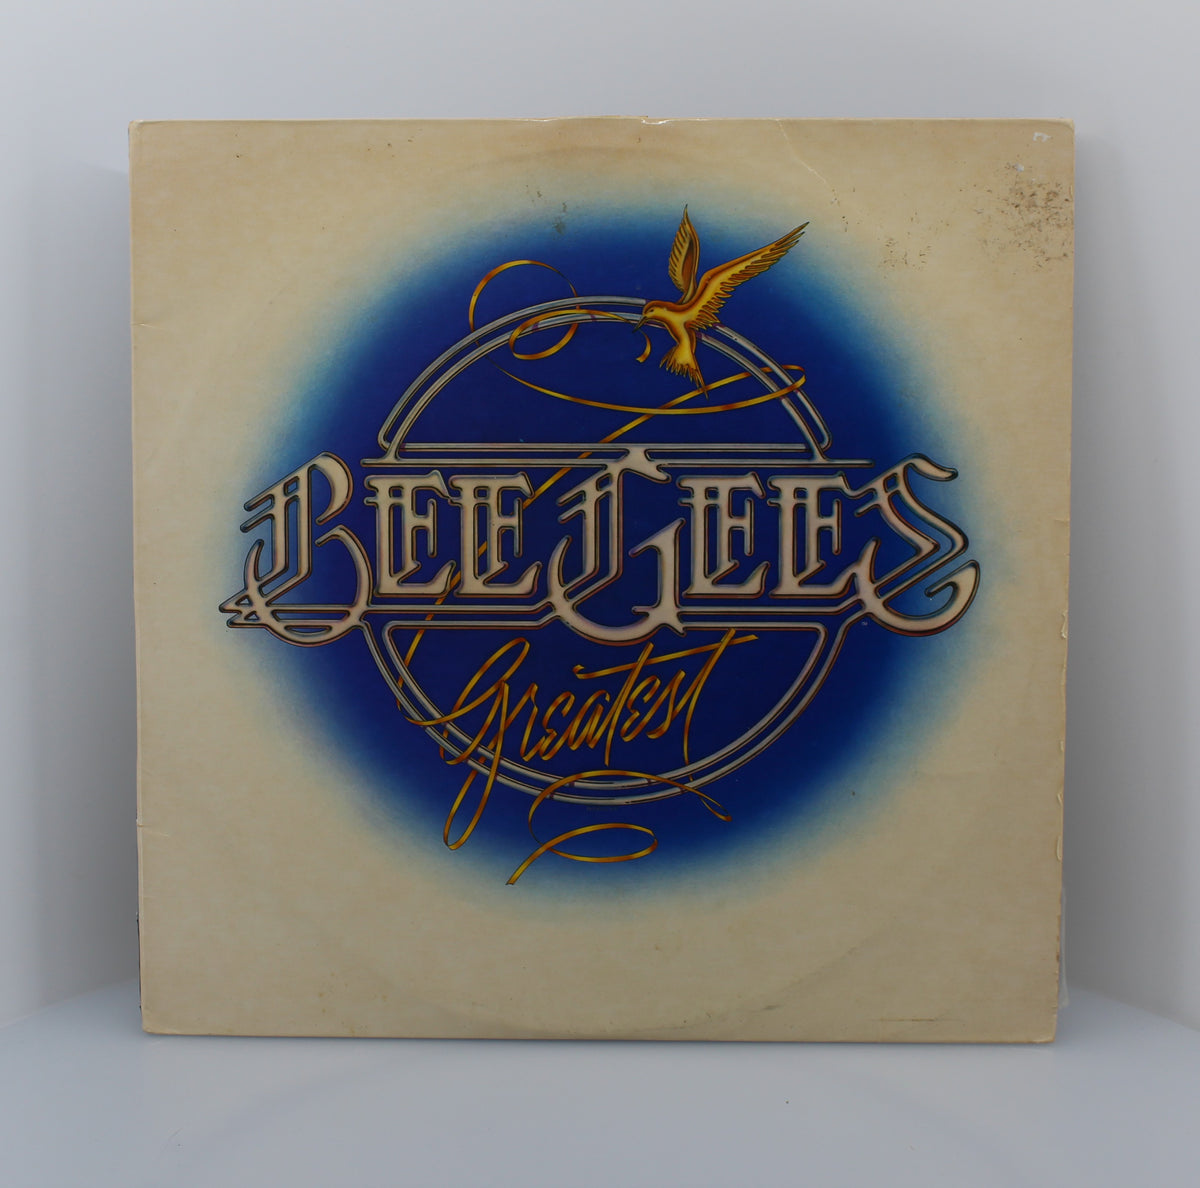 Bee Gees – Greatest, 2 x Vinyl, LP, Compilation, South Africa 1979